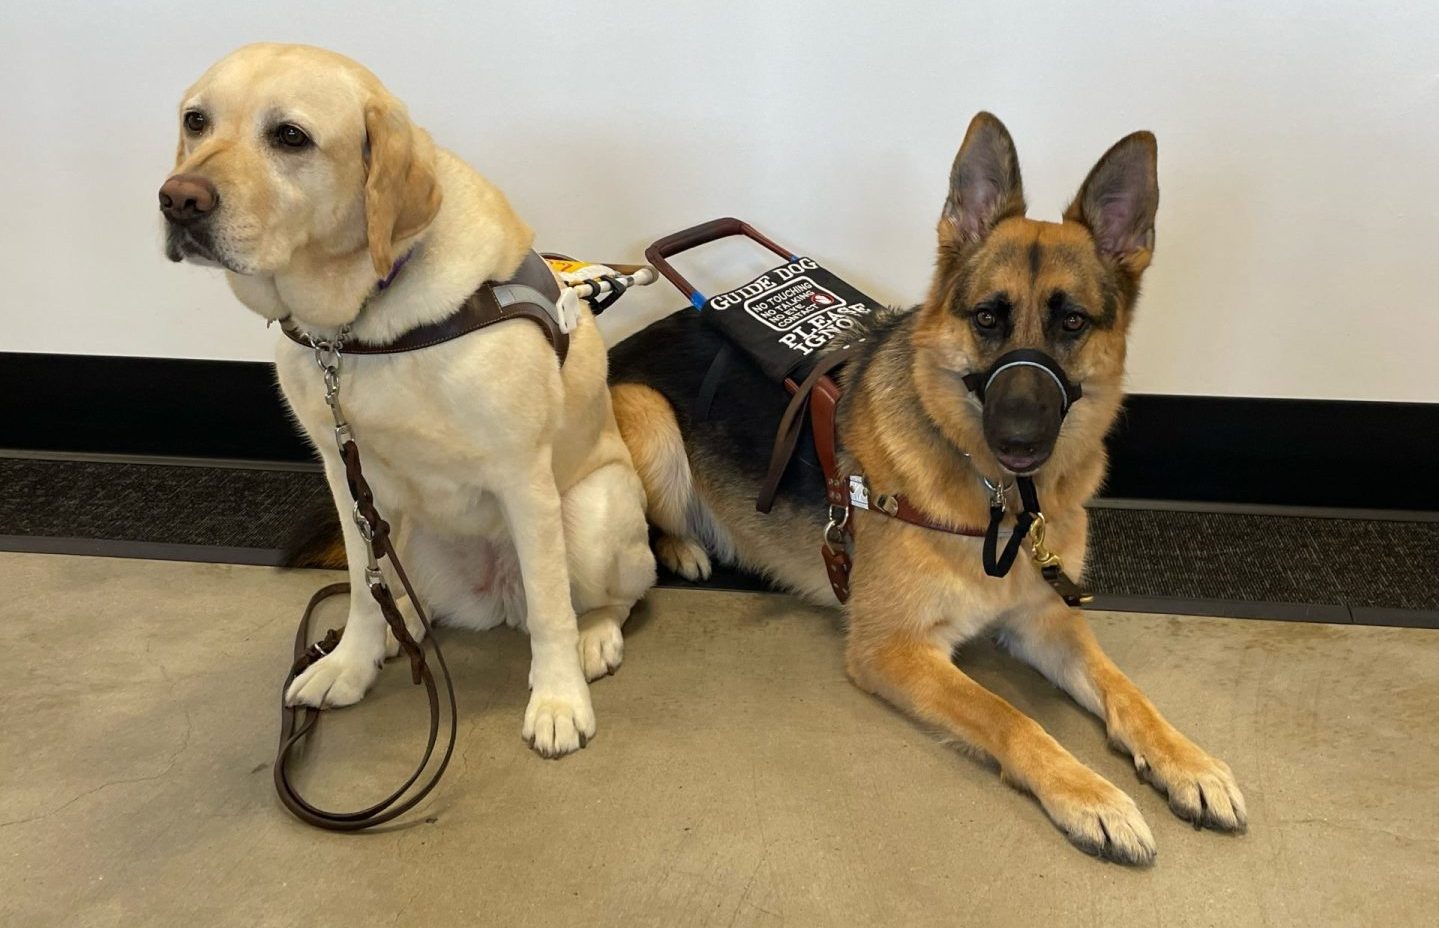 Two guide dogs, a yellow lab and a German shepherd, sit side by side while wearing their harnesses.